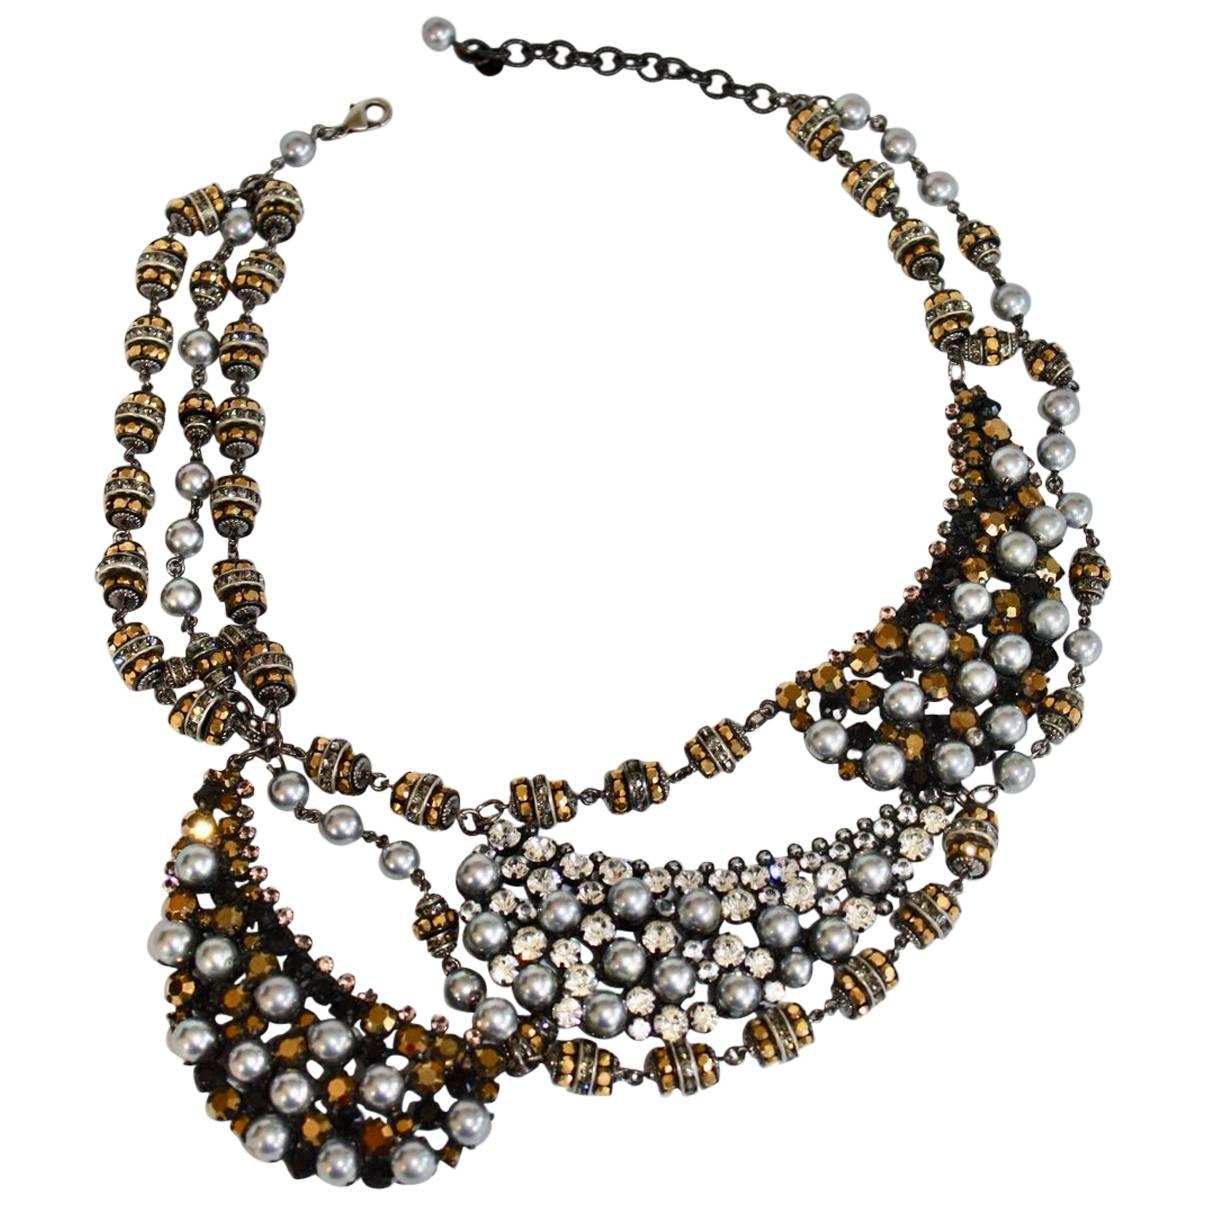 Francoise Montague Donville Grey Pearl and Swarovski Crystal Statement Necklace